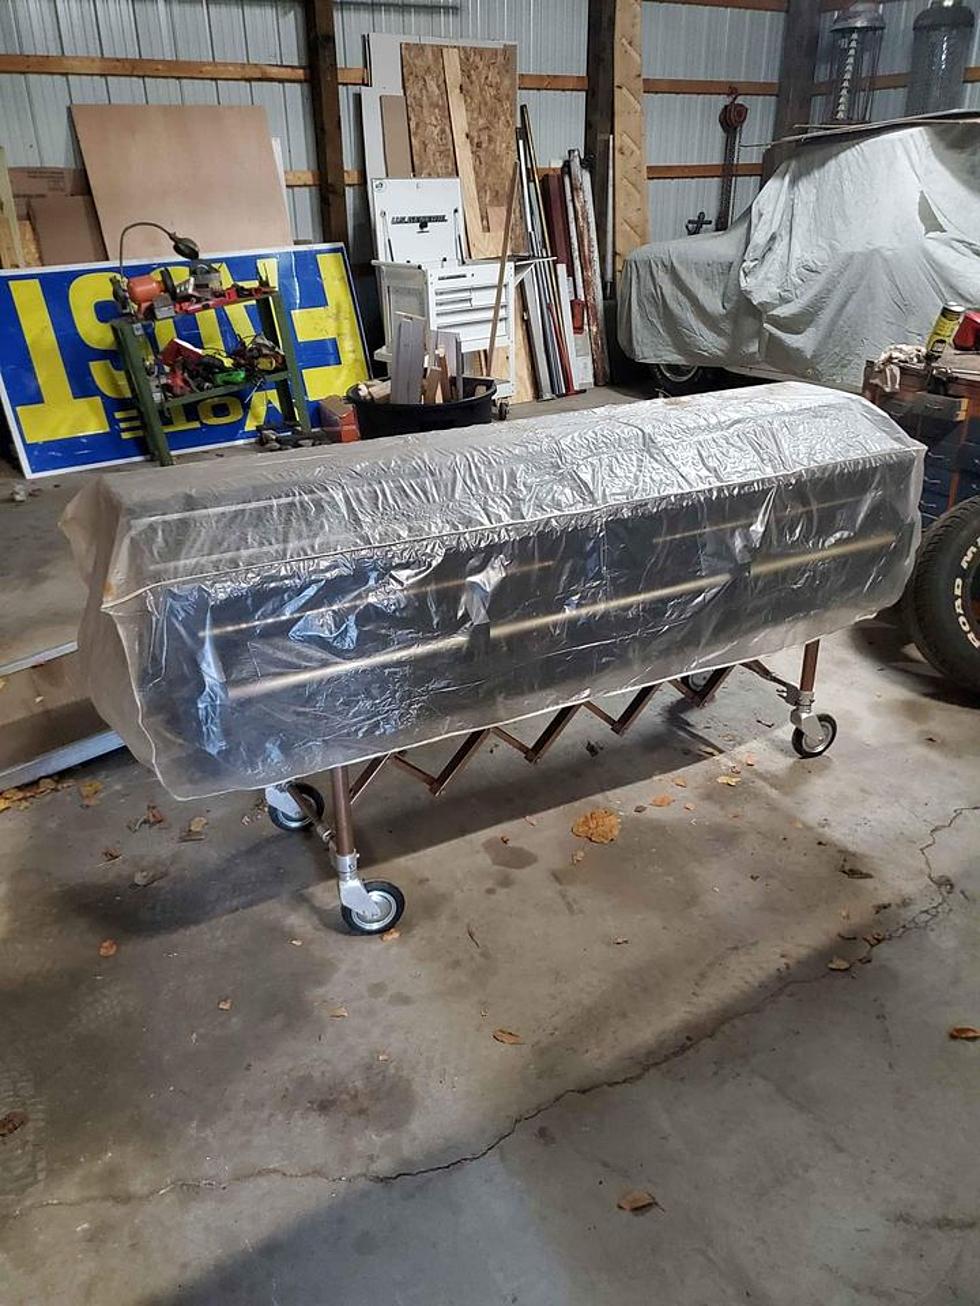 FOUND! Casket/Coffin for Sale in Sauk Rapids &#8211; Halloween or Real??